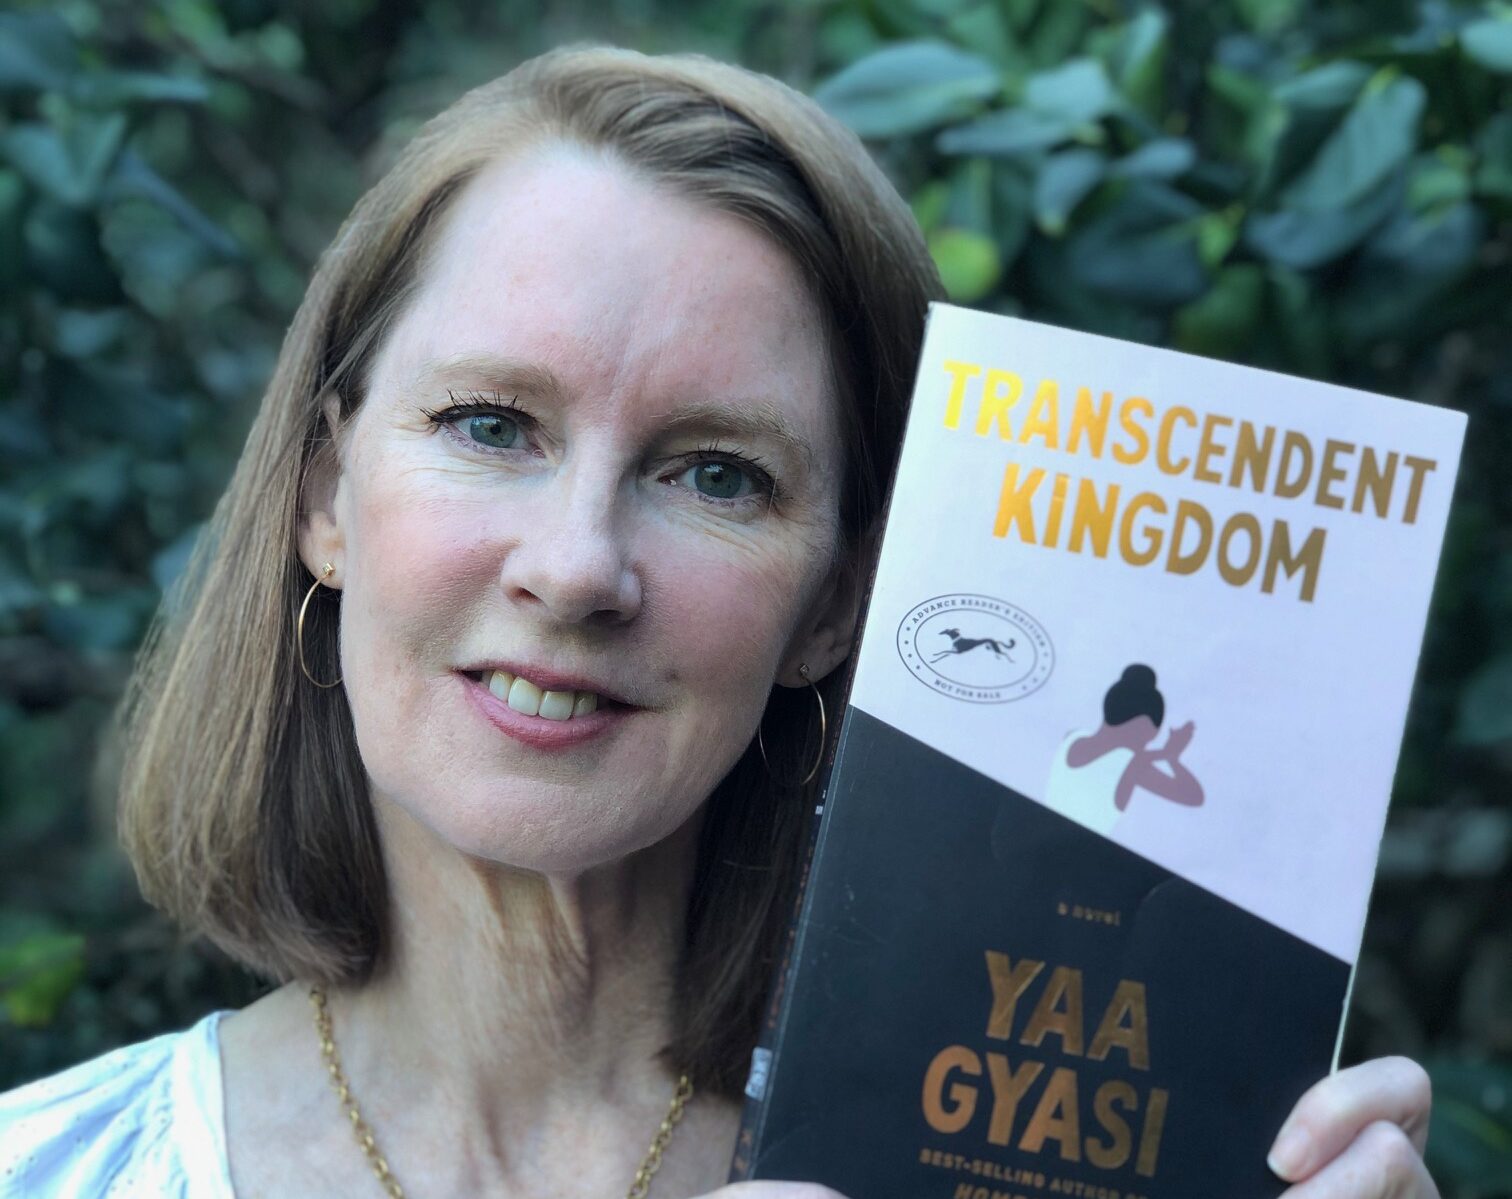 Gretchen holding the book Transcendent Kingdom by Yaa Gyasi